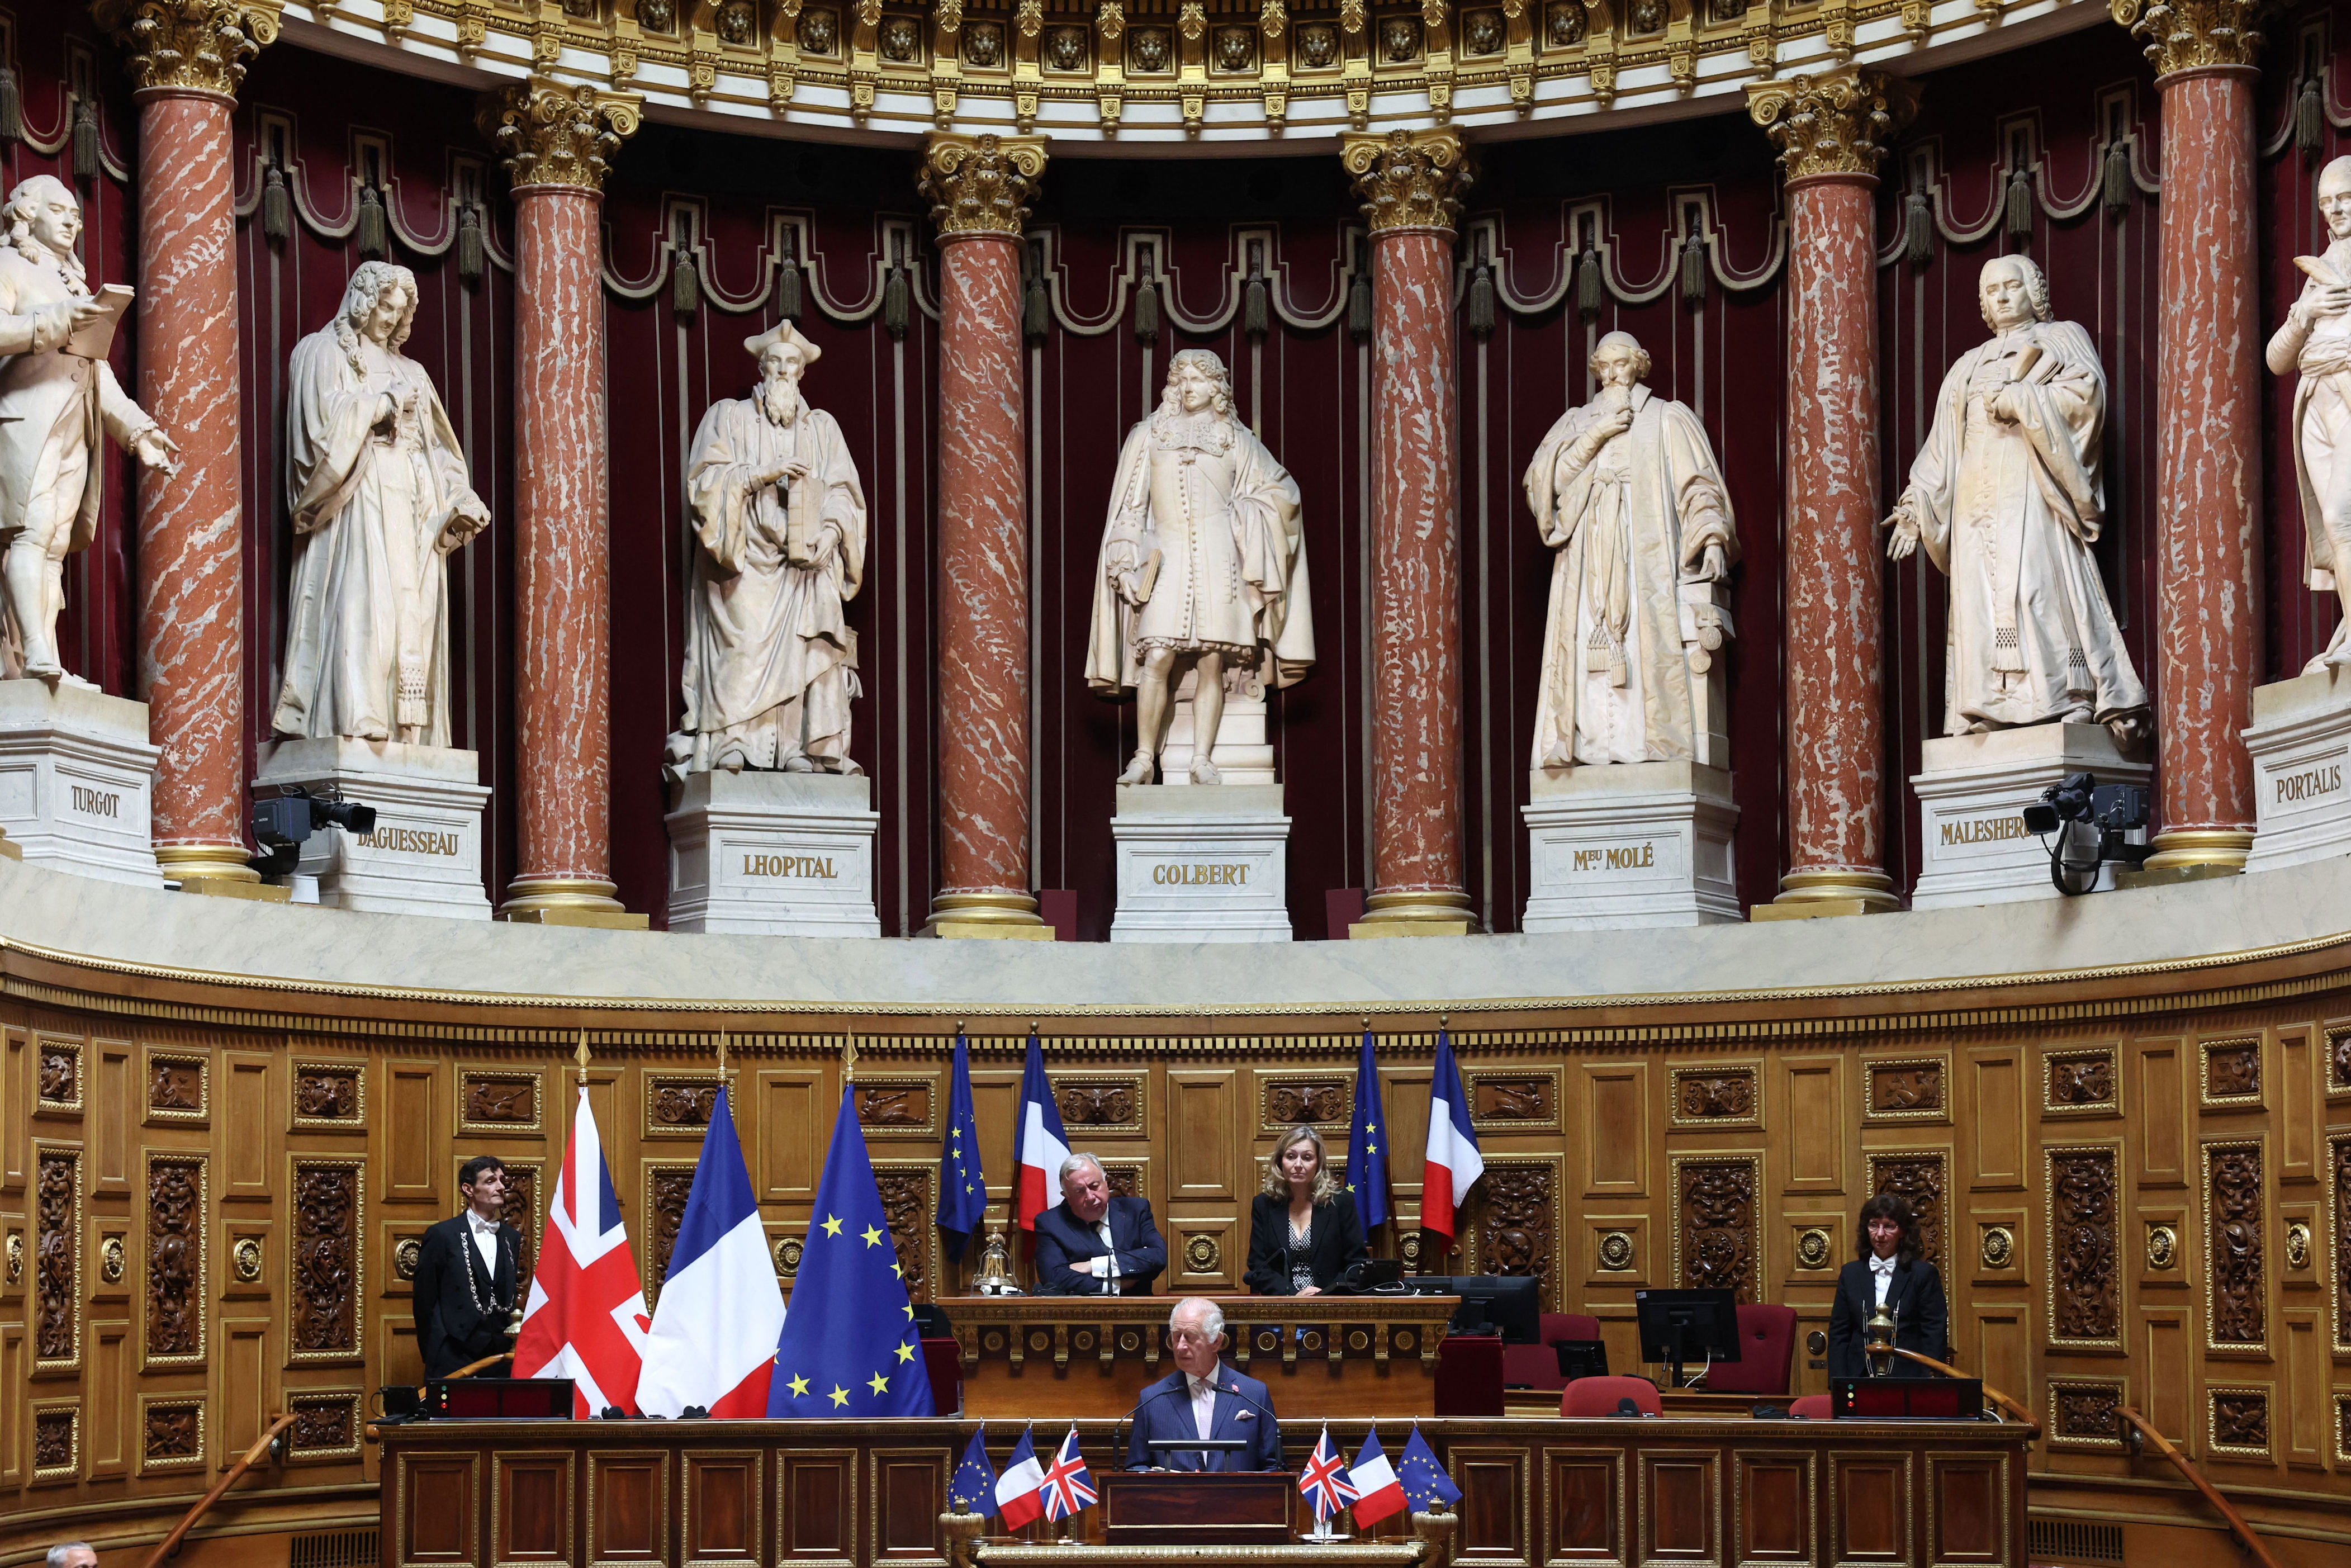 <p>King Charles III addressed senators and members of the National Assembly at the French Senate in Paris -- the first time a member of the British royal family has spoken from the Senate Chamber -- on Sept. 21, 2023, during <a href="https://www.wonderwall.com/entertainment/king-charles-iii-and-queen-camilla-in-france-see-the-best-photos-from-the-royals-official-state-visit-791038.gallery">his three-day state visit to France</a>.</p>